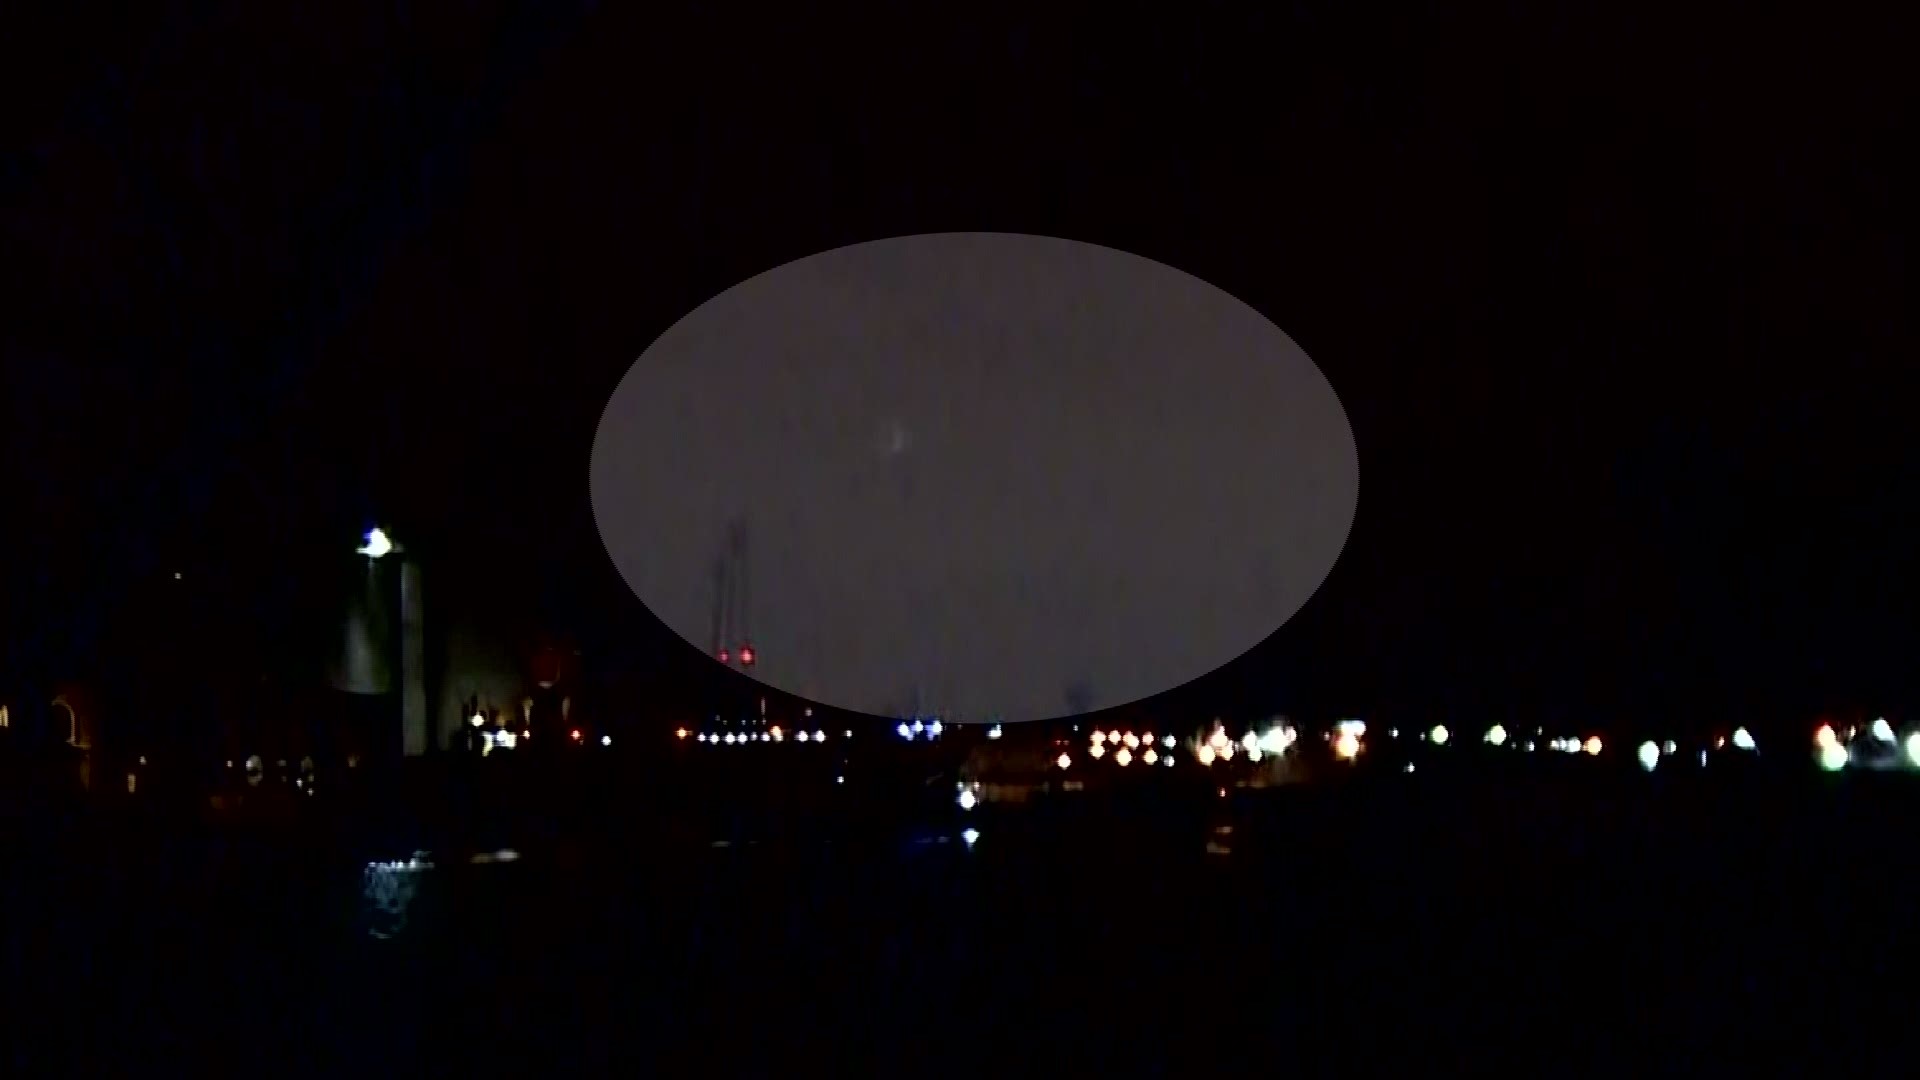 At first glance, it looks like our camera captured a UFO one morning. But look closer and it's clearly a bird.